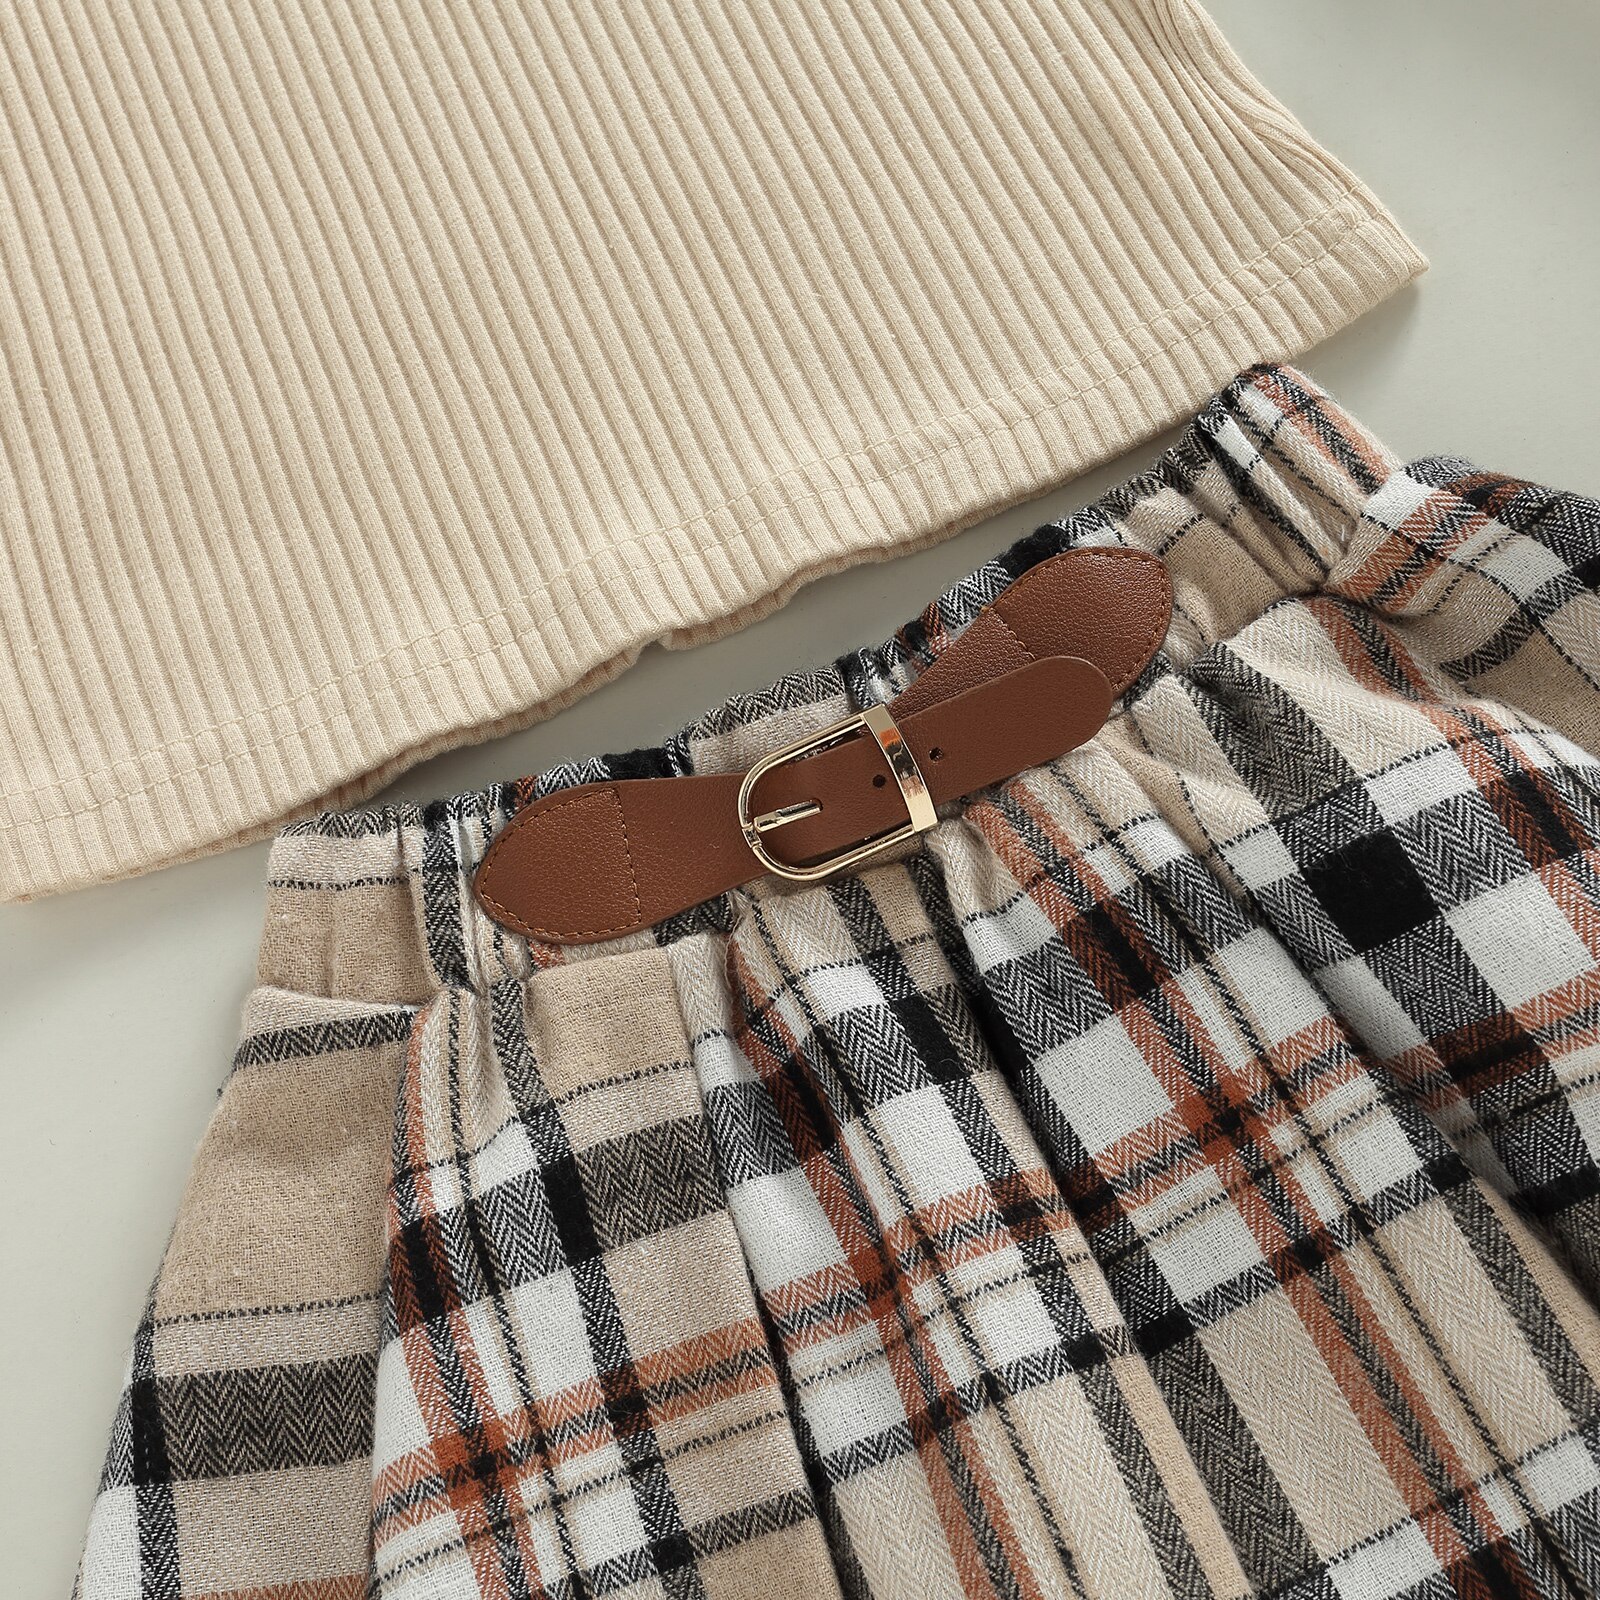 Citgeett-Autumn-Kids-Toddler-Girls-Outfit-Sets-Solid-Color-Long-Sleeve-Tops-A-line-Plaid-Skirt-4